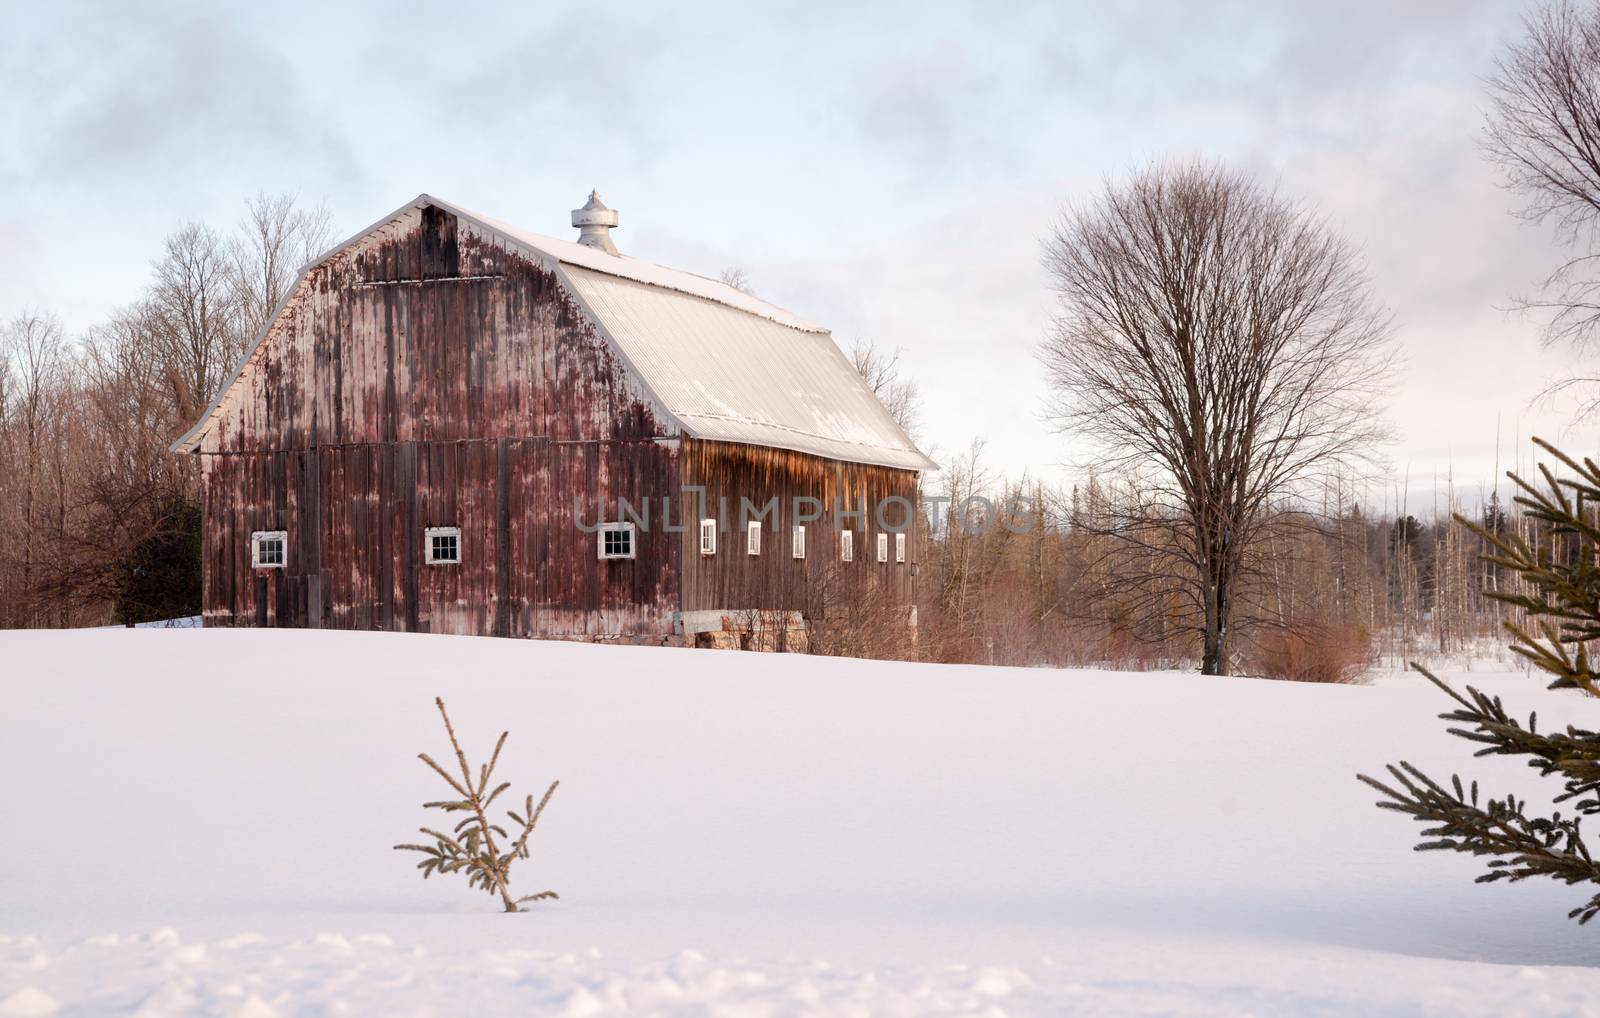 Wintertime Farm Field Barn Agricultural Structure Ranch Building by ChrisBoswell